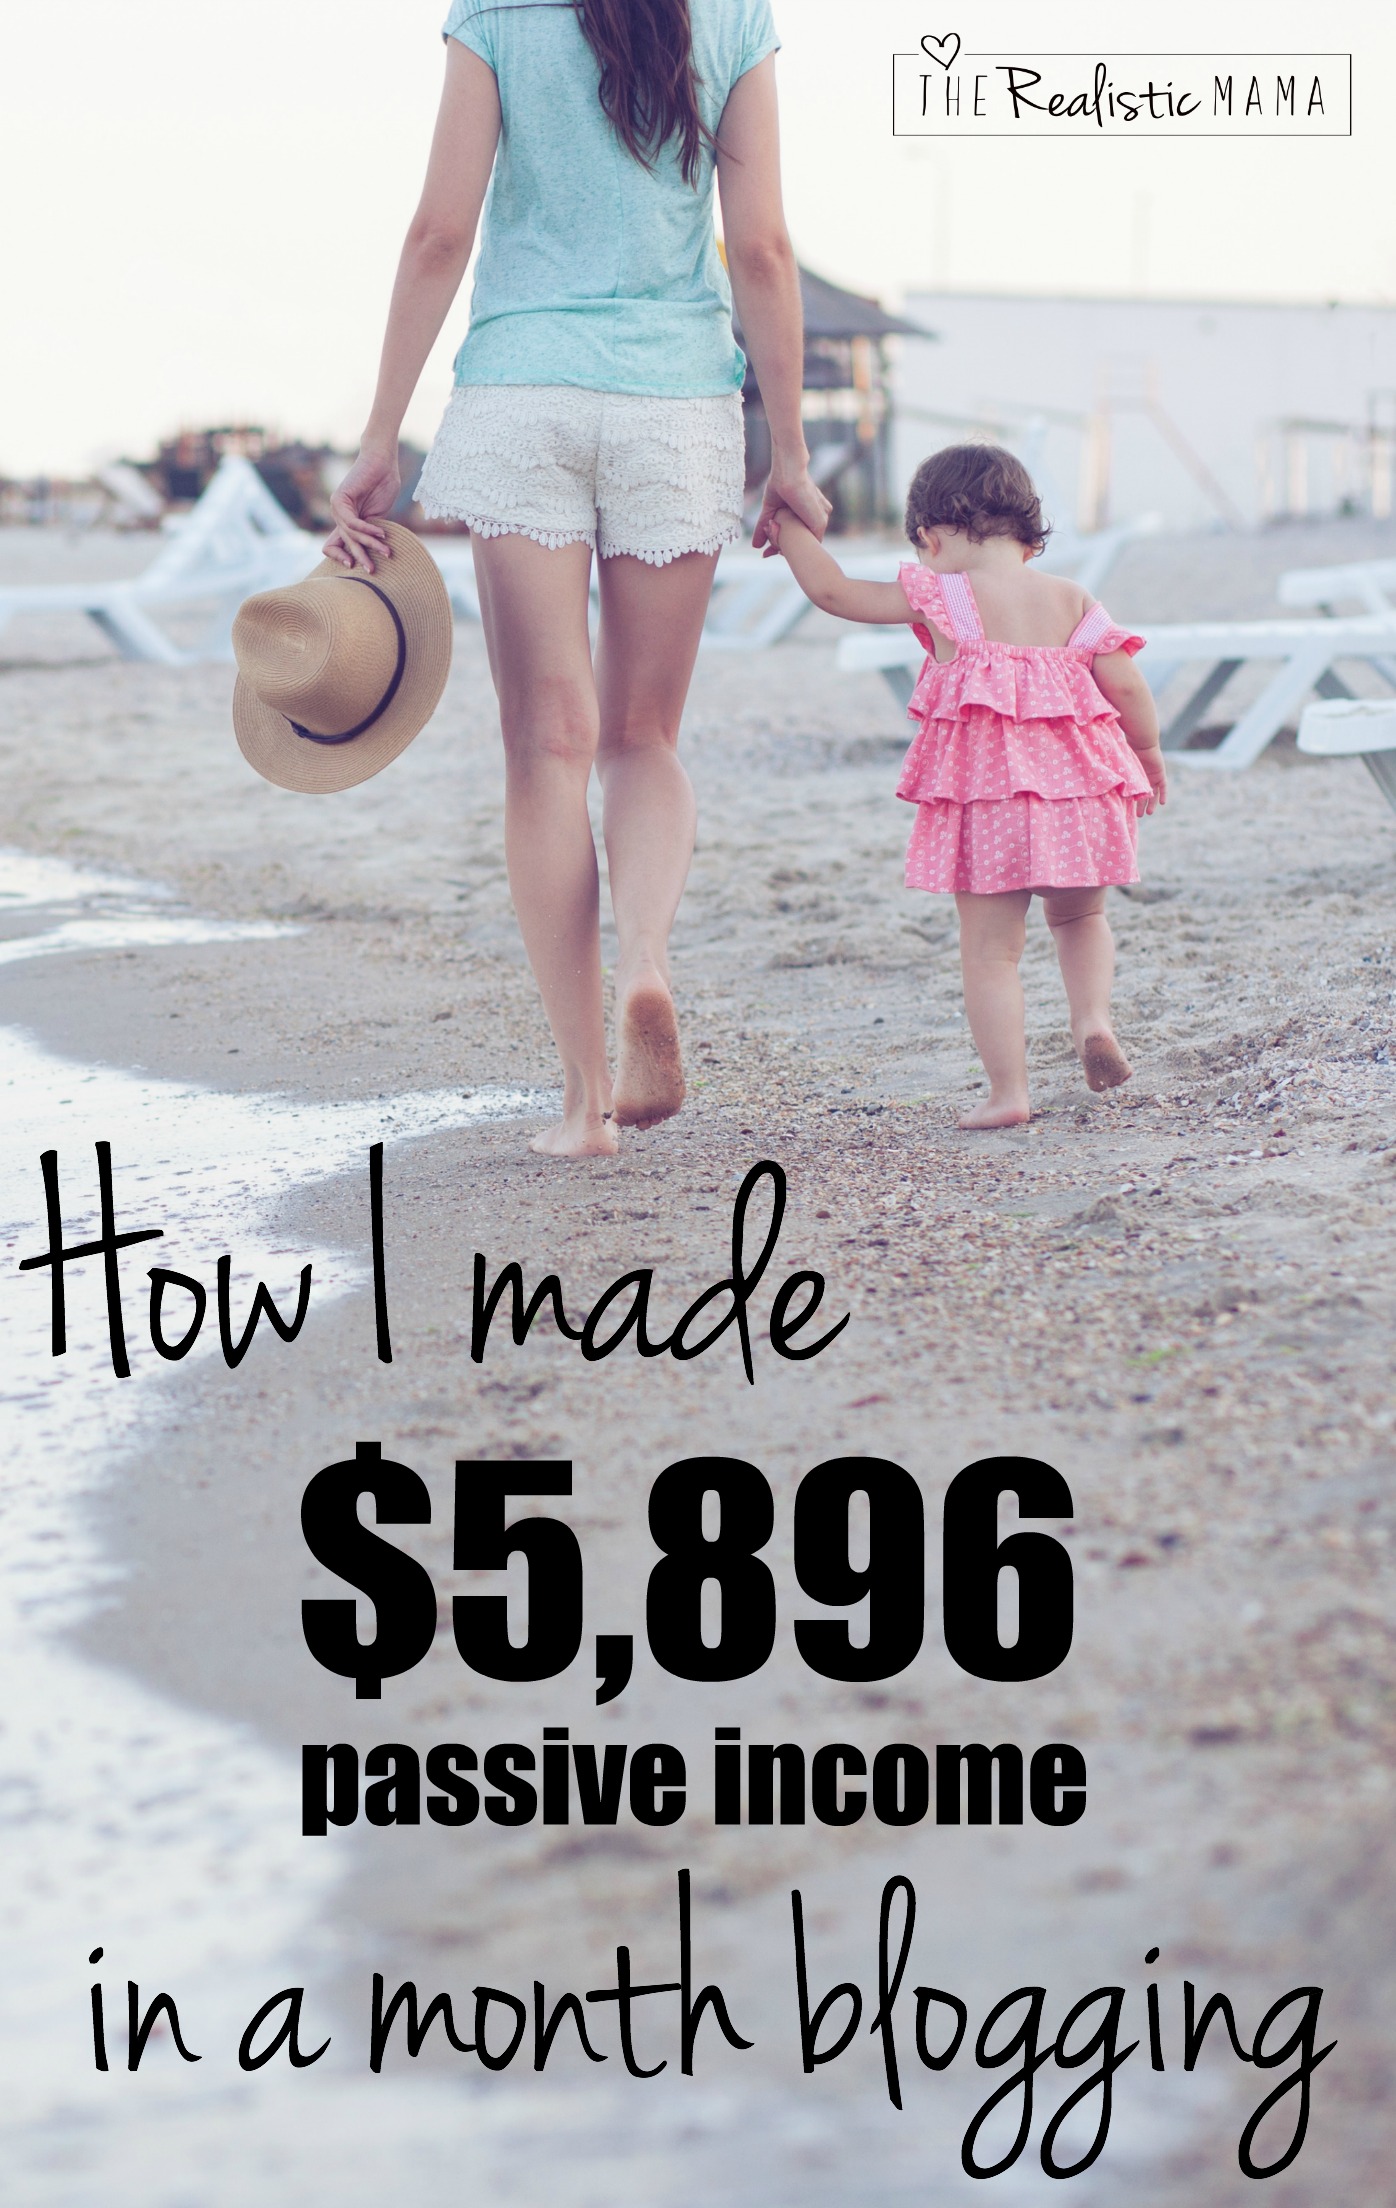 How I made $5896 passive income last month blogging